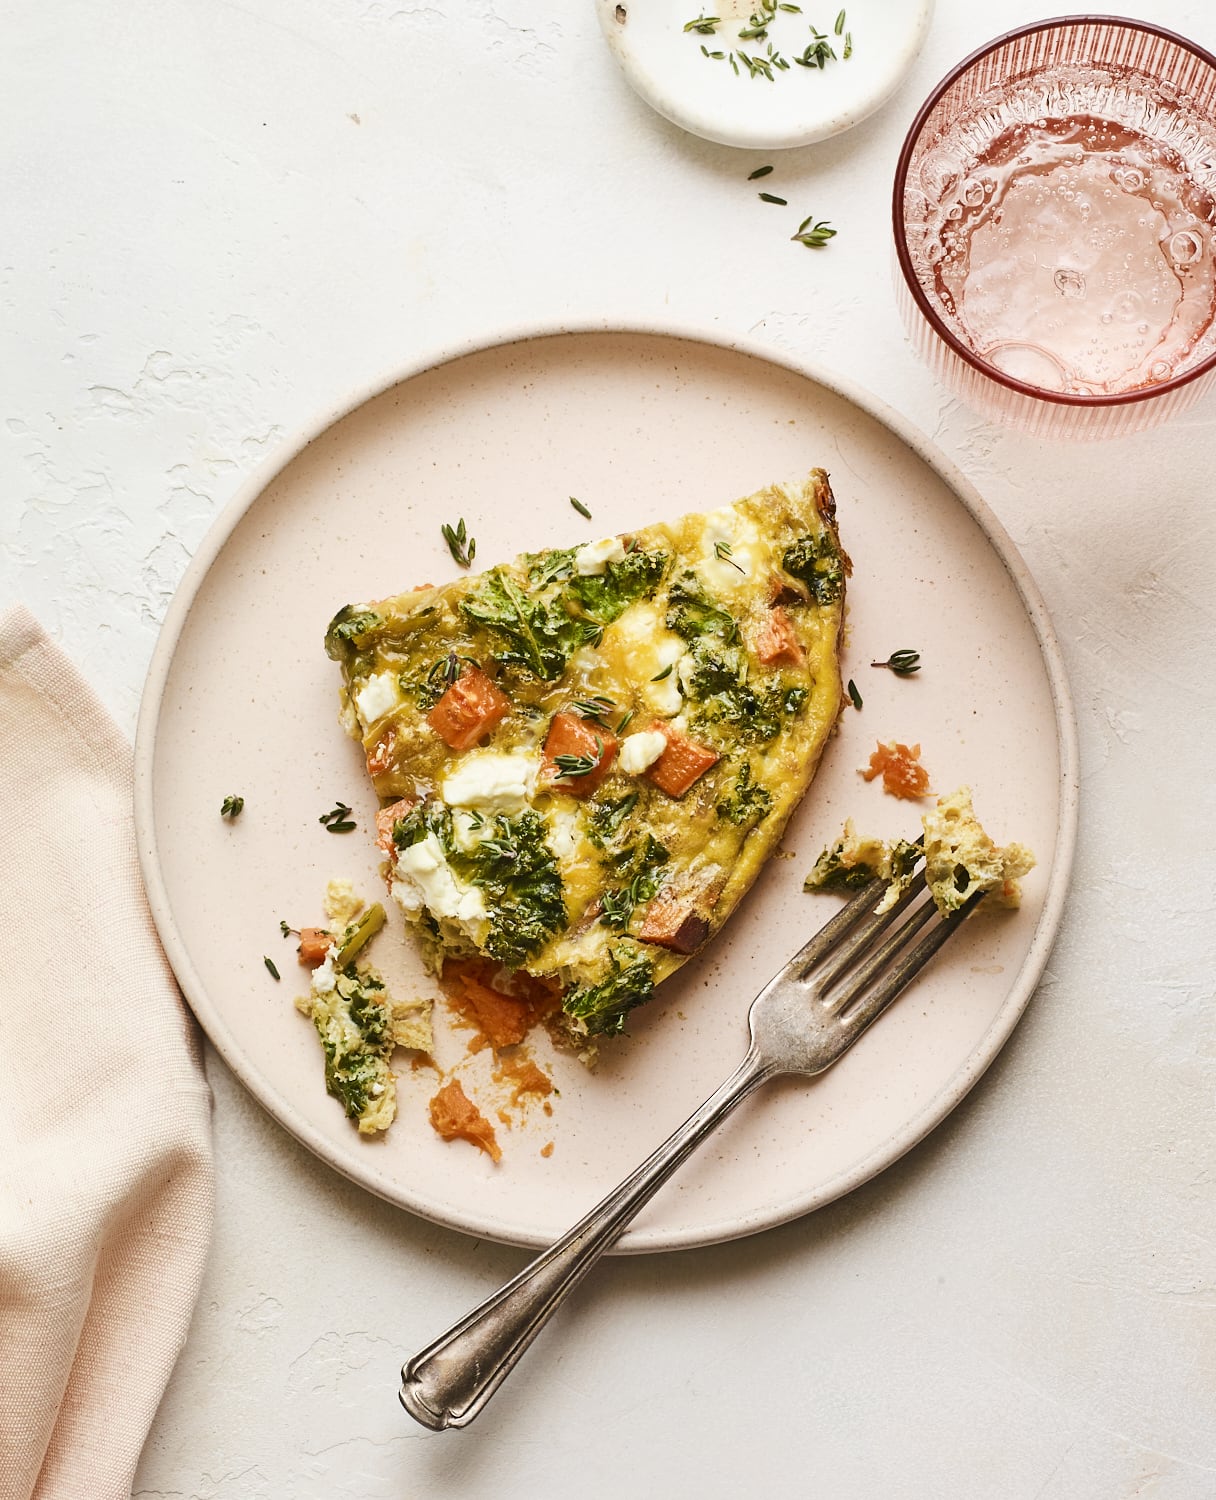 Slice of sweet potato kale frittata on a plate with a fork. A bite it taken out.